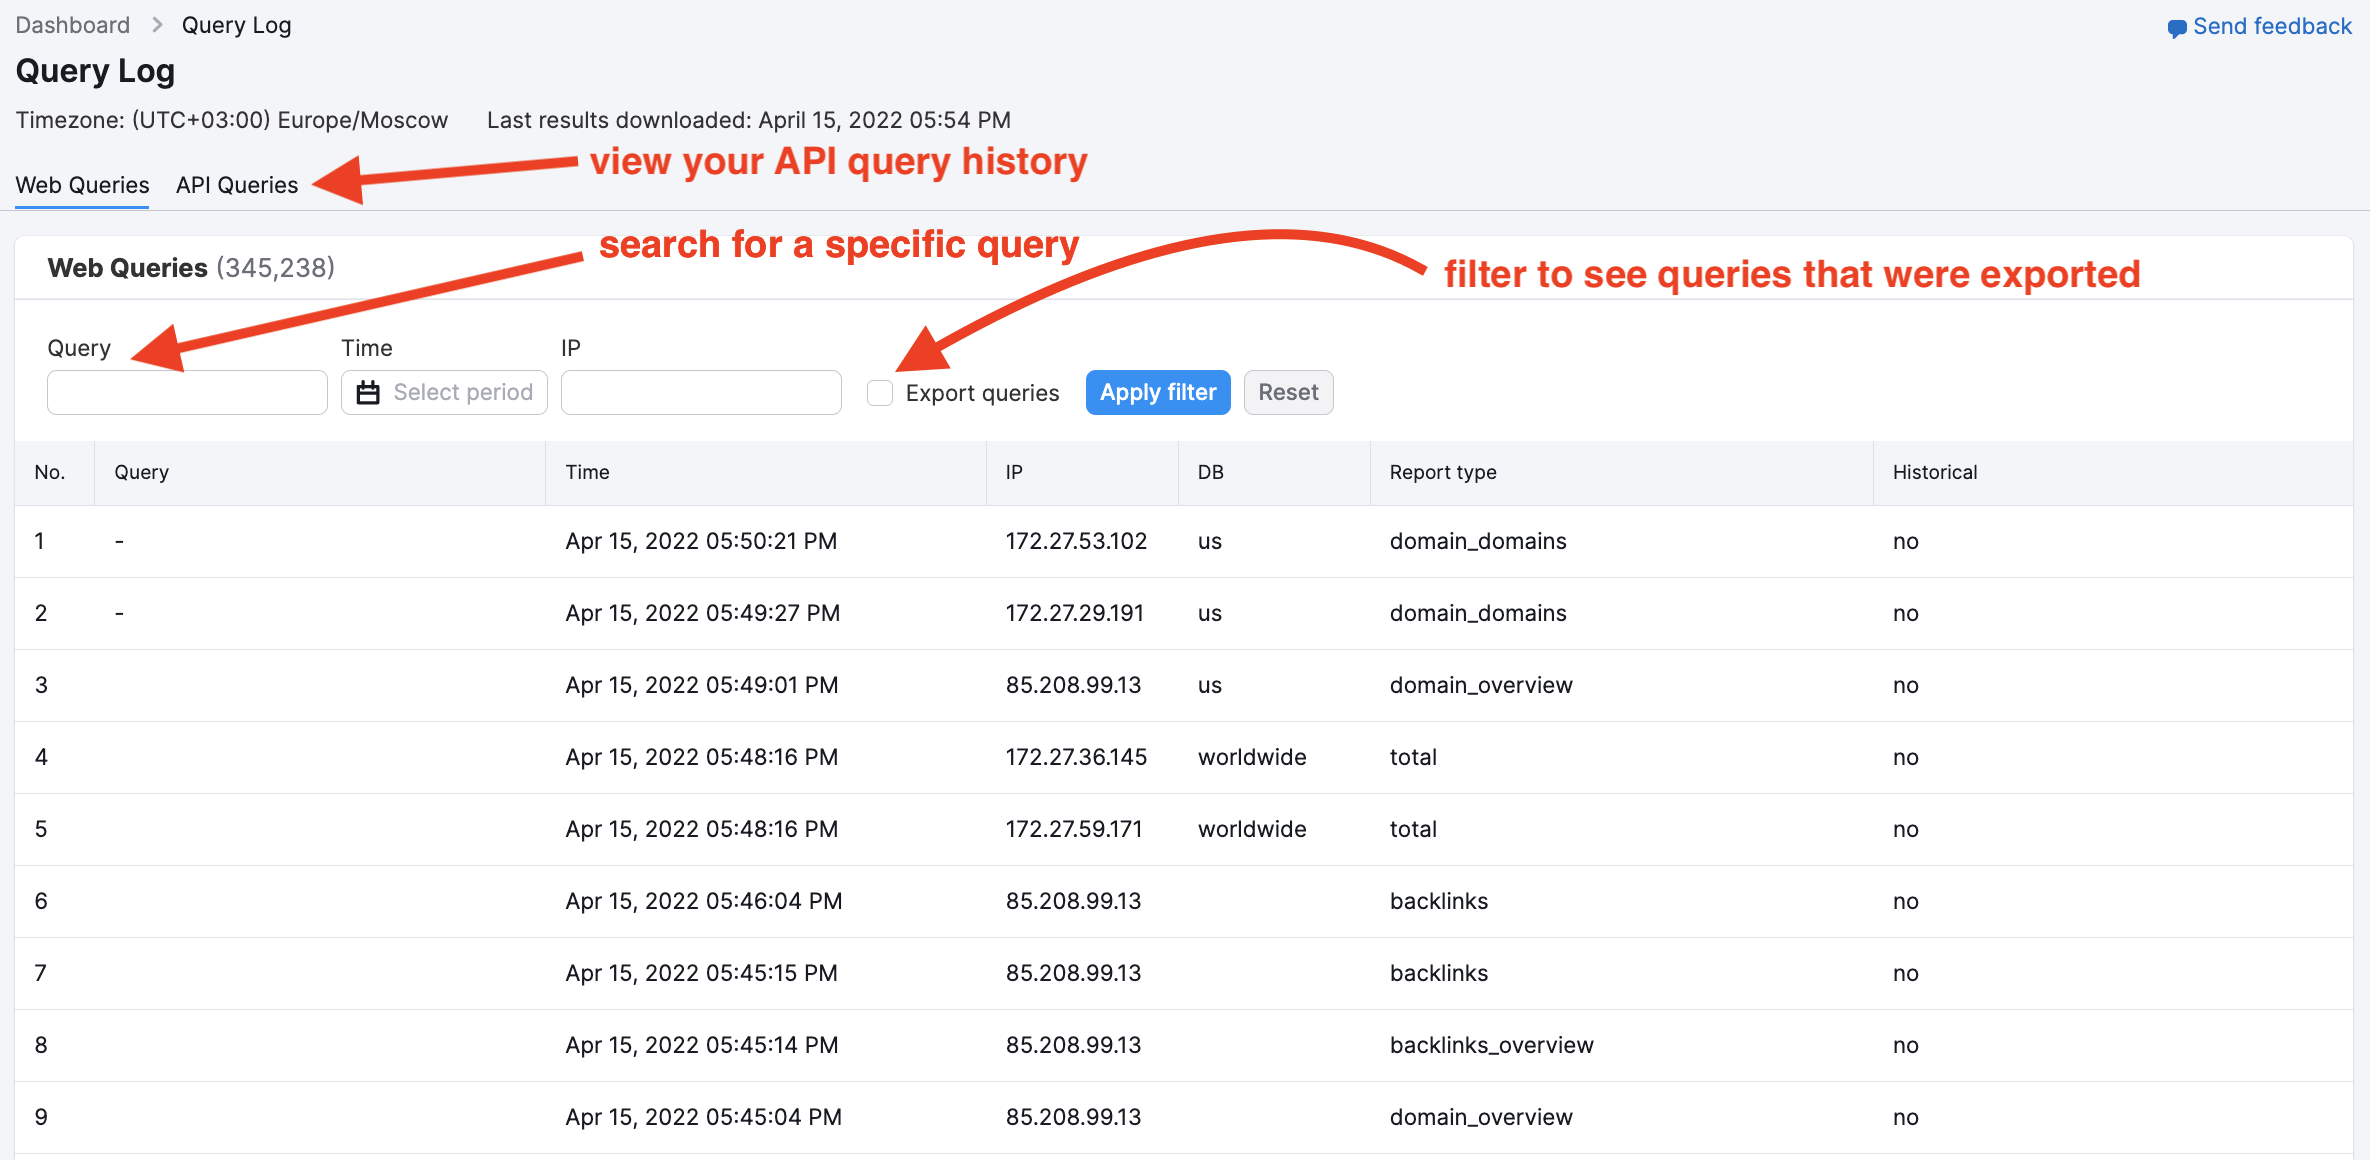 Query log report interface with the Web Queries tab open